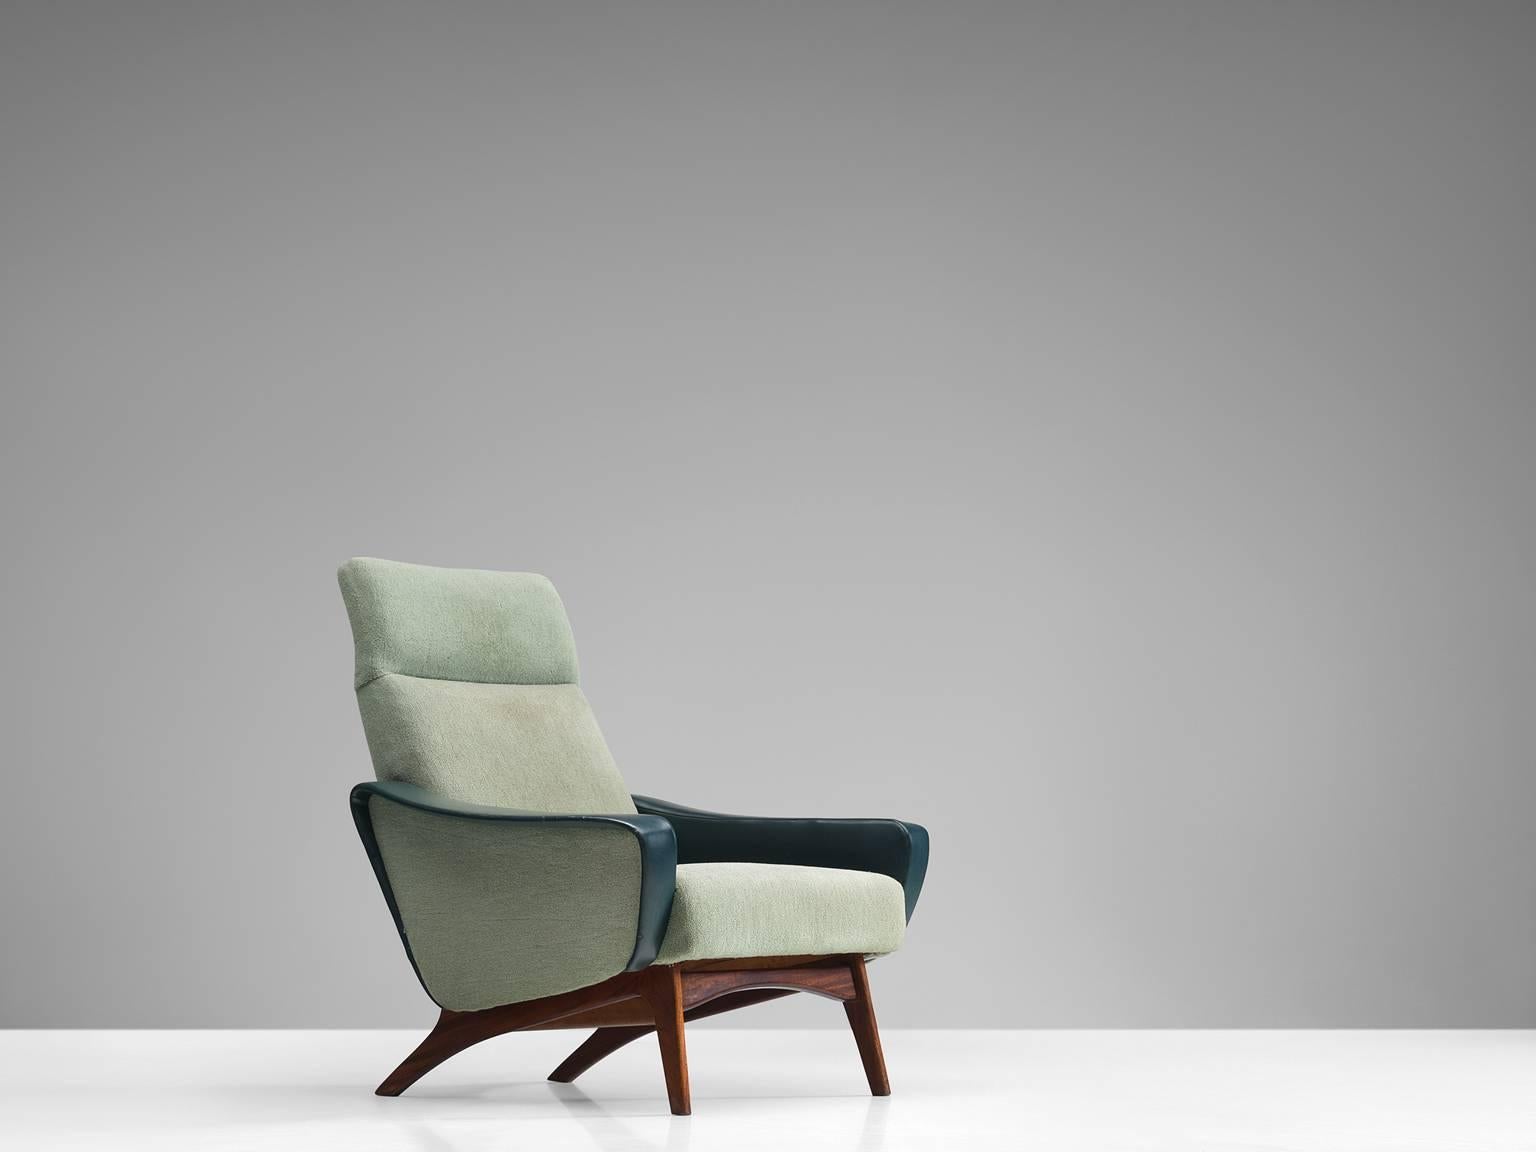 Easy chair, fabric, faux leather and wood, Sweden, 1960s.

This armchair features an organic base that is sculptural and crafted in an exquisite manner. The mint green fabric shell shows various layers and rounded shapes. The wide armrests, tilted